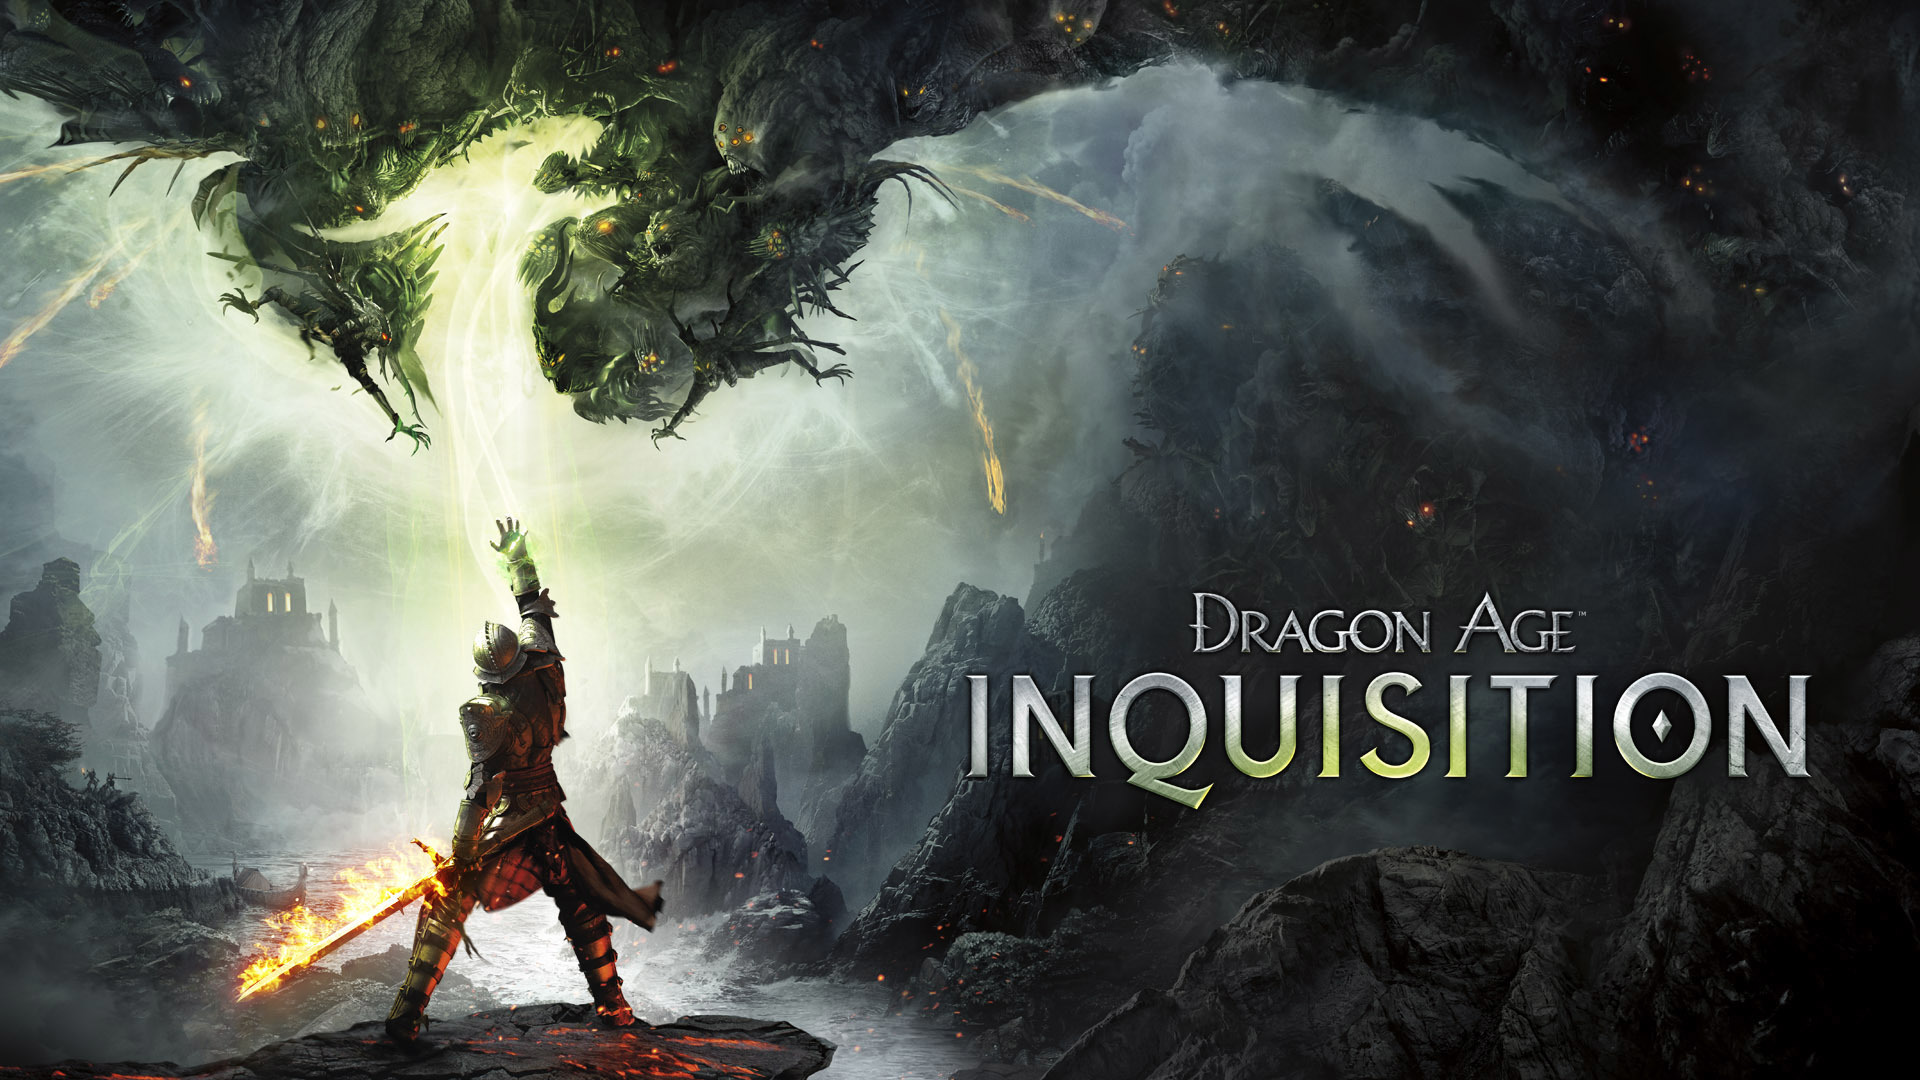 fav 0 rate 0 tweet 1920x1080 games dragon age dragon age inquisition 1920x1080